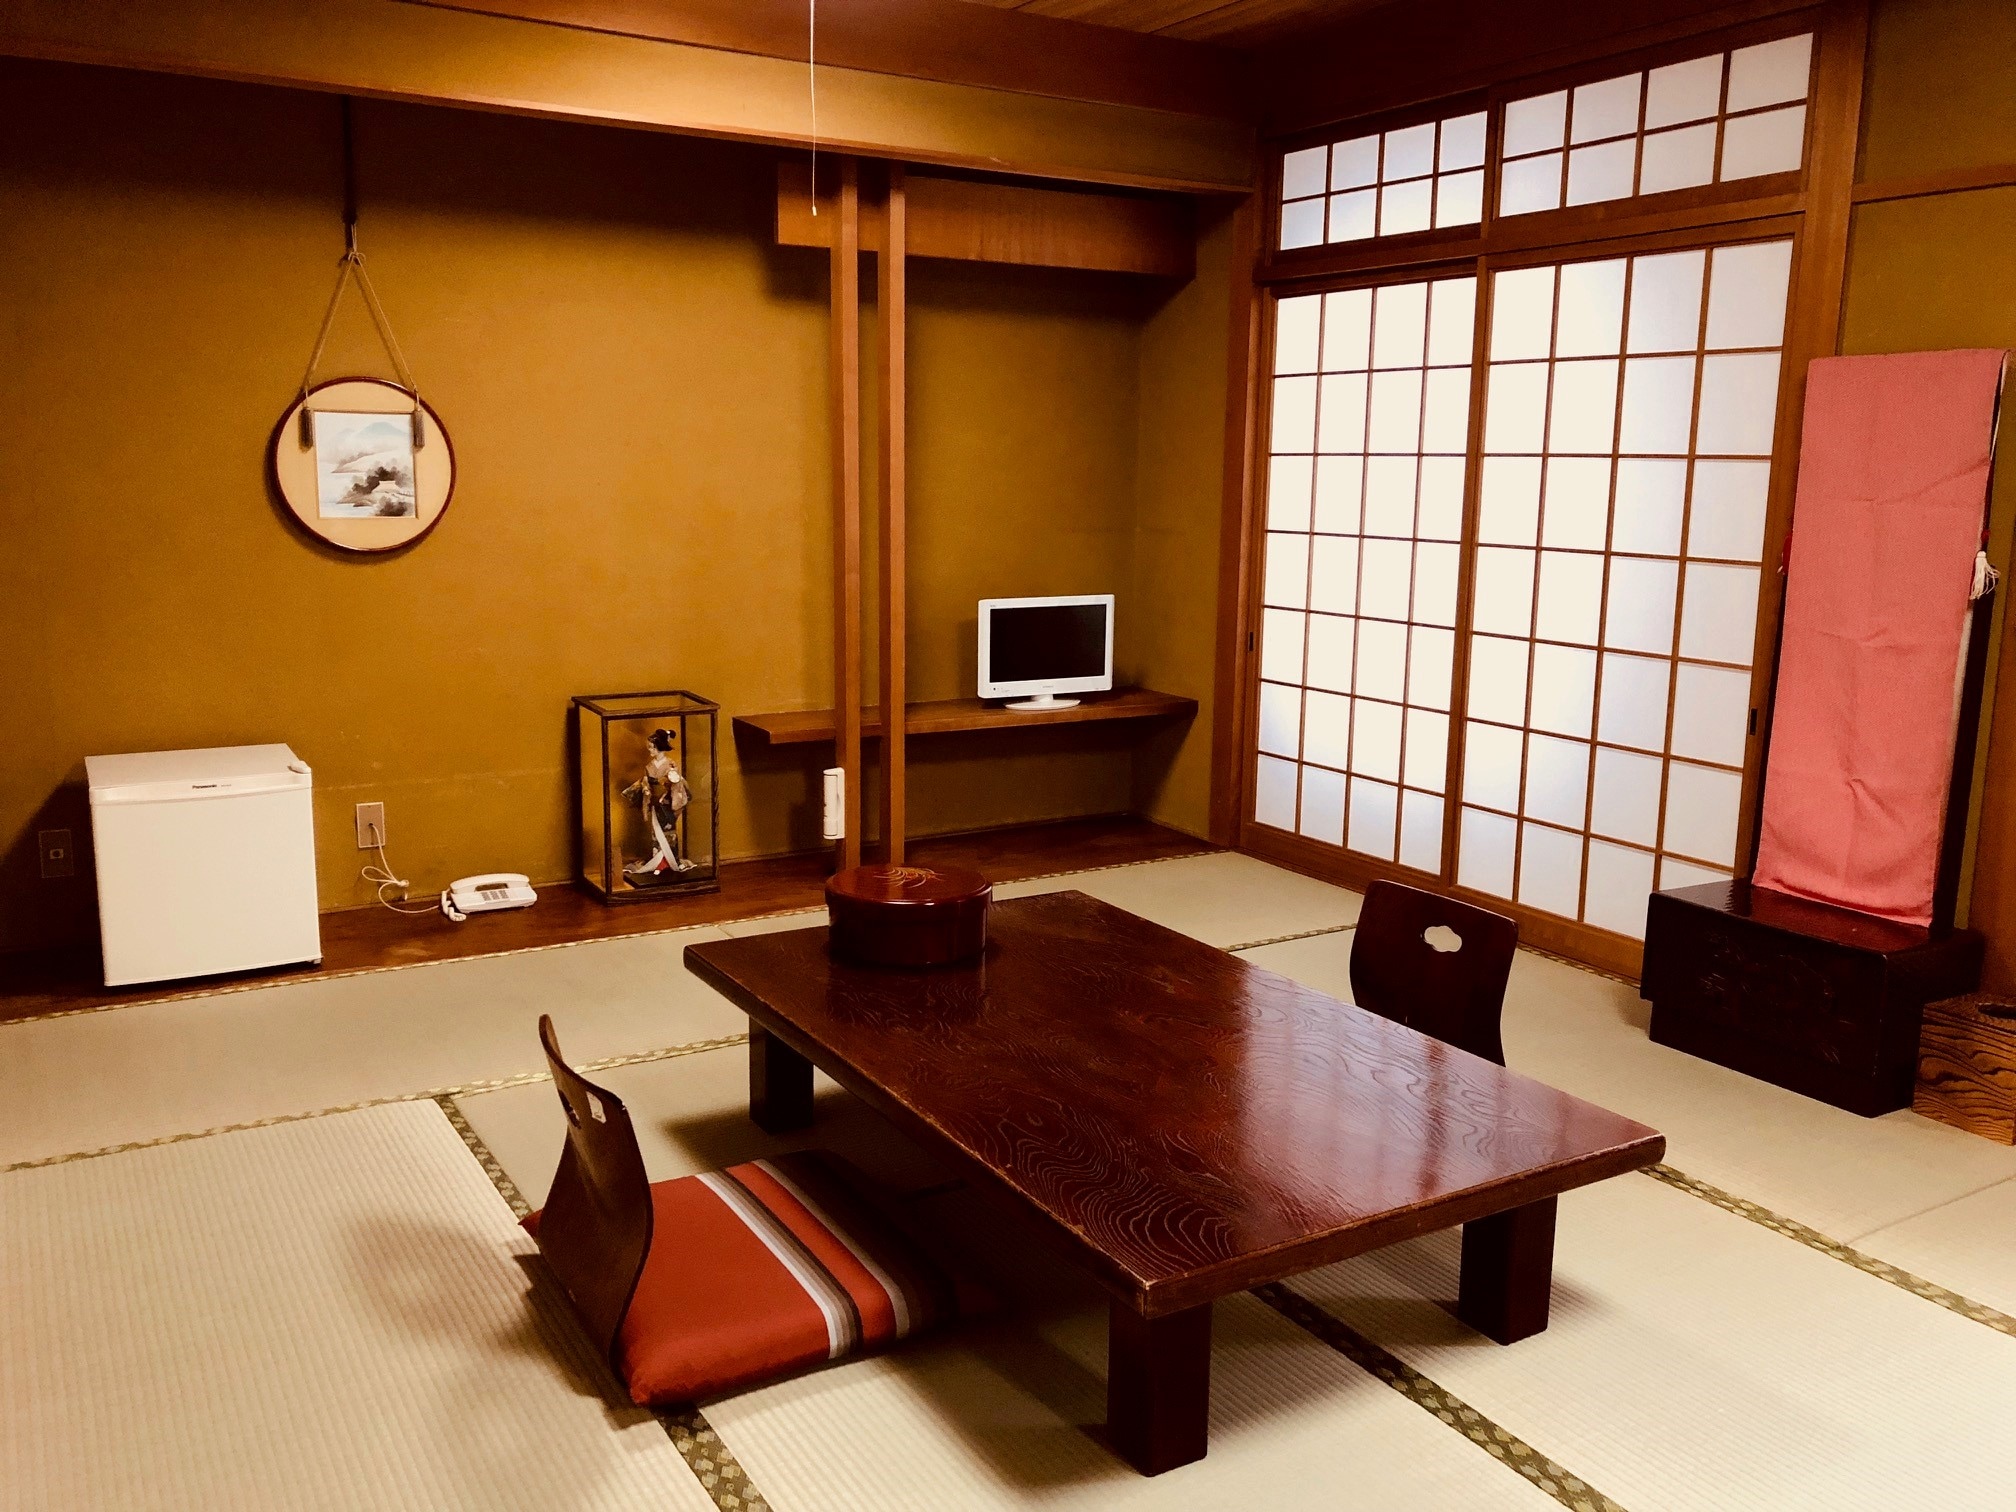 It is a Japanese-style room with just re-covered tatami mats.